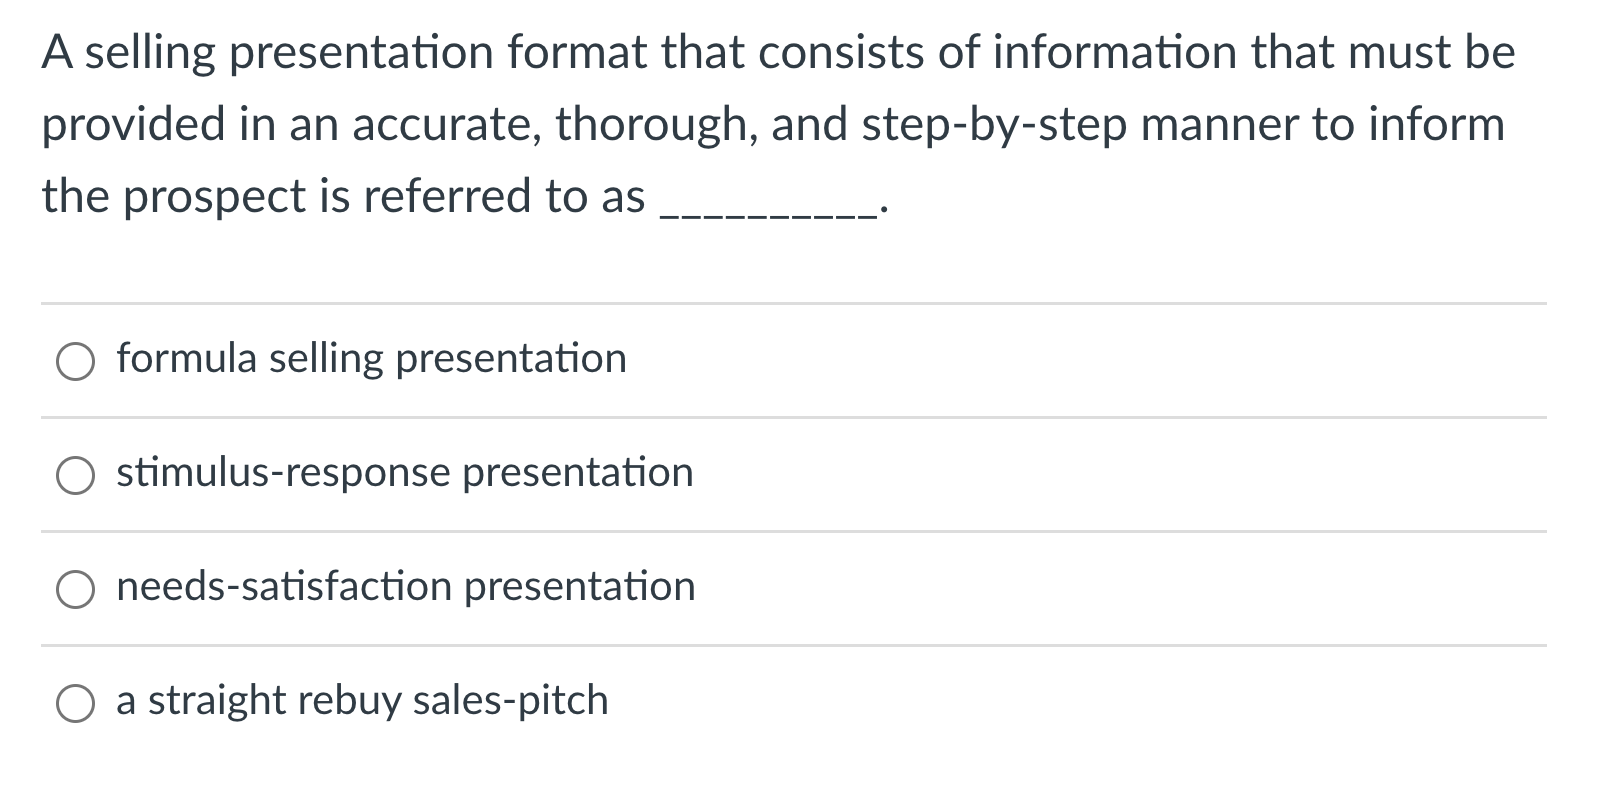 a formula selling presentation is a format that